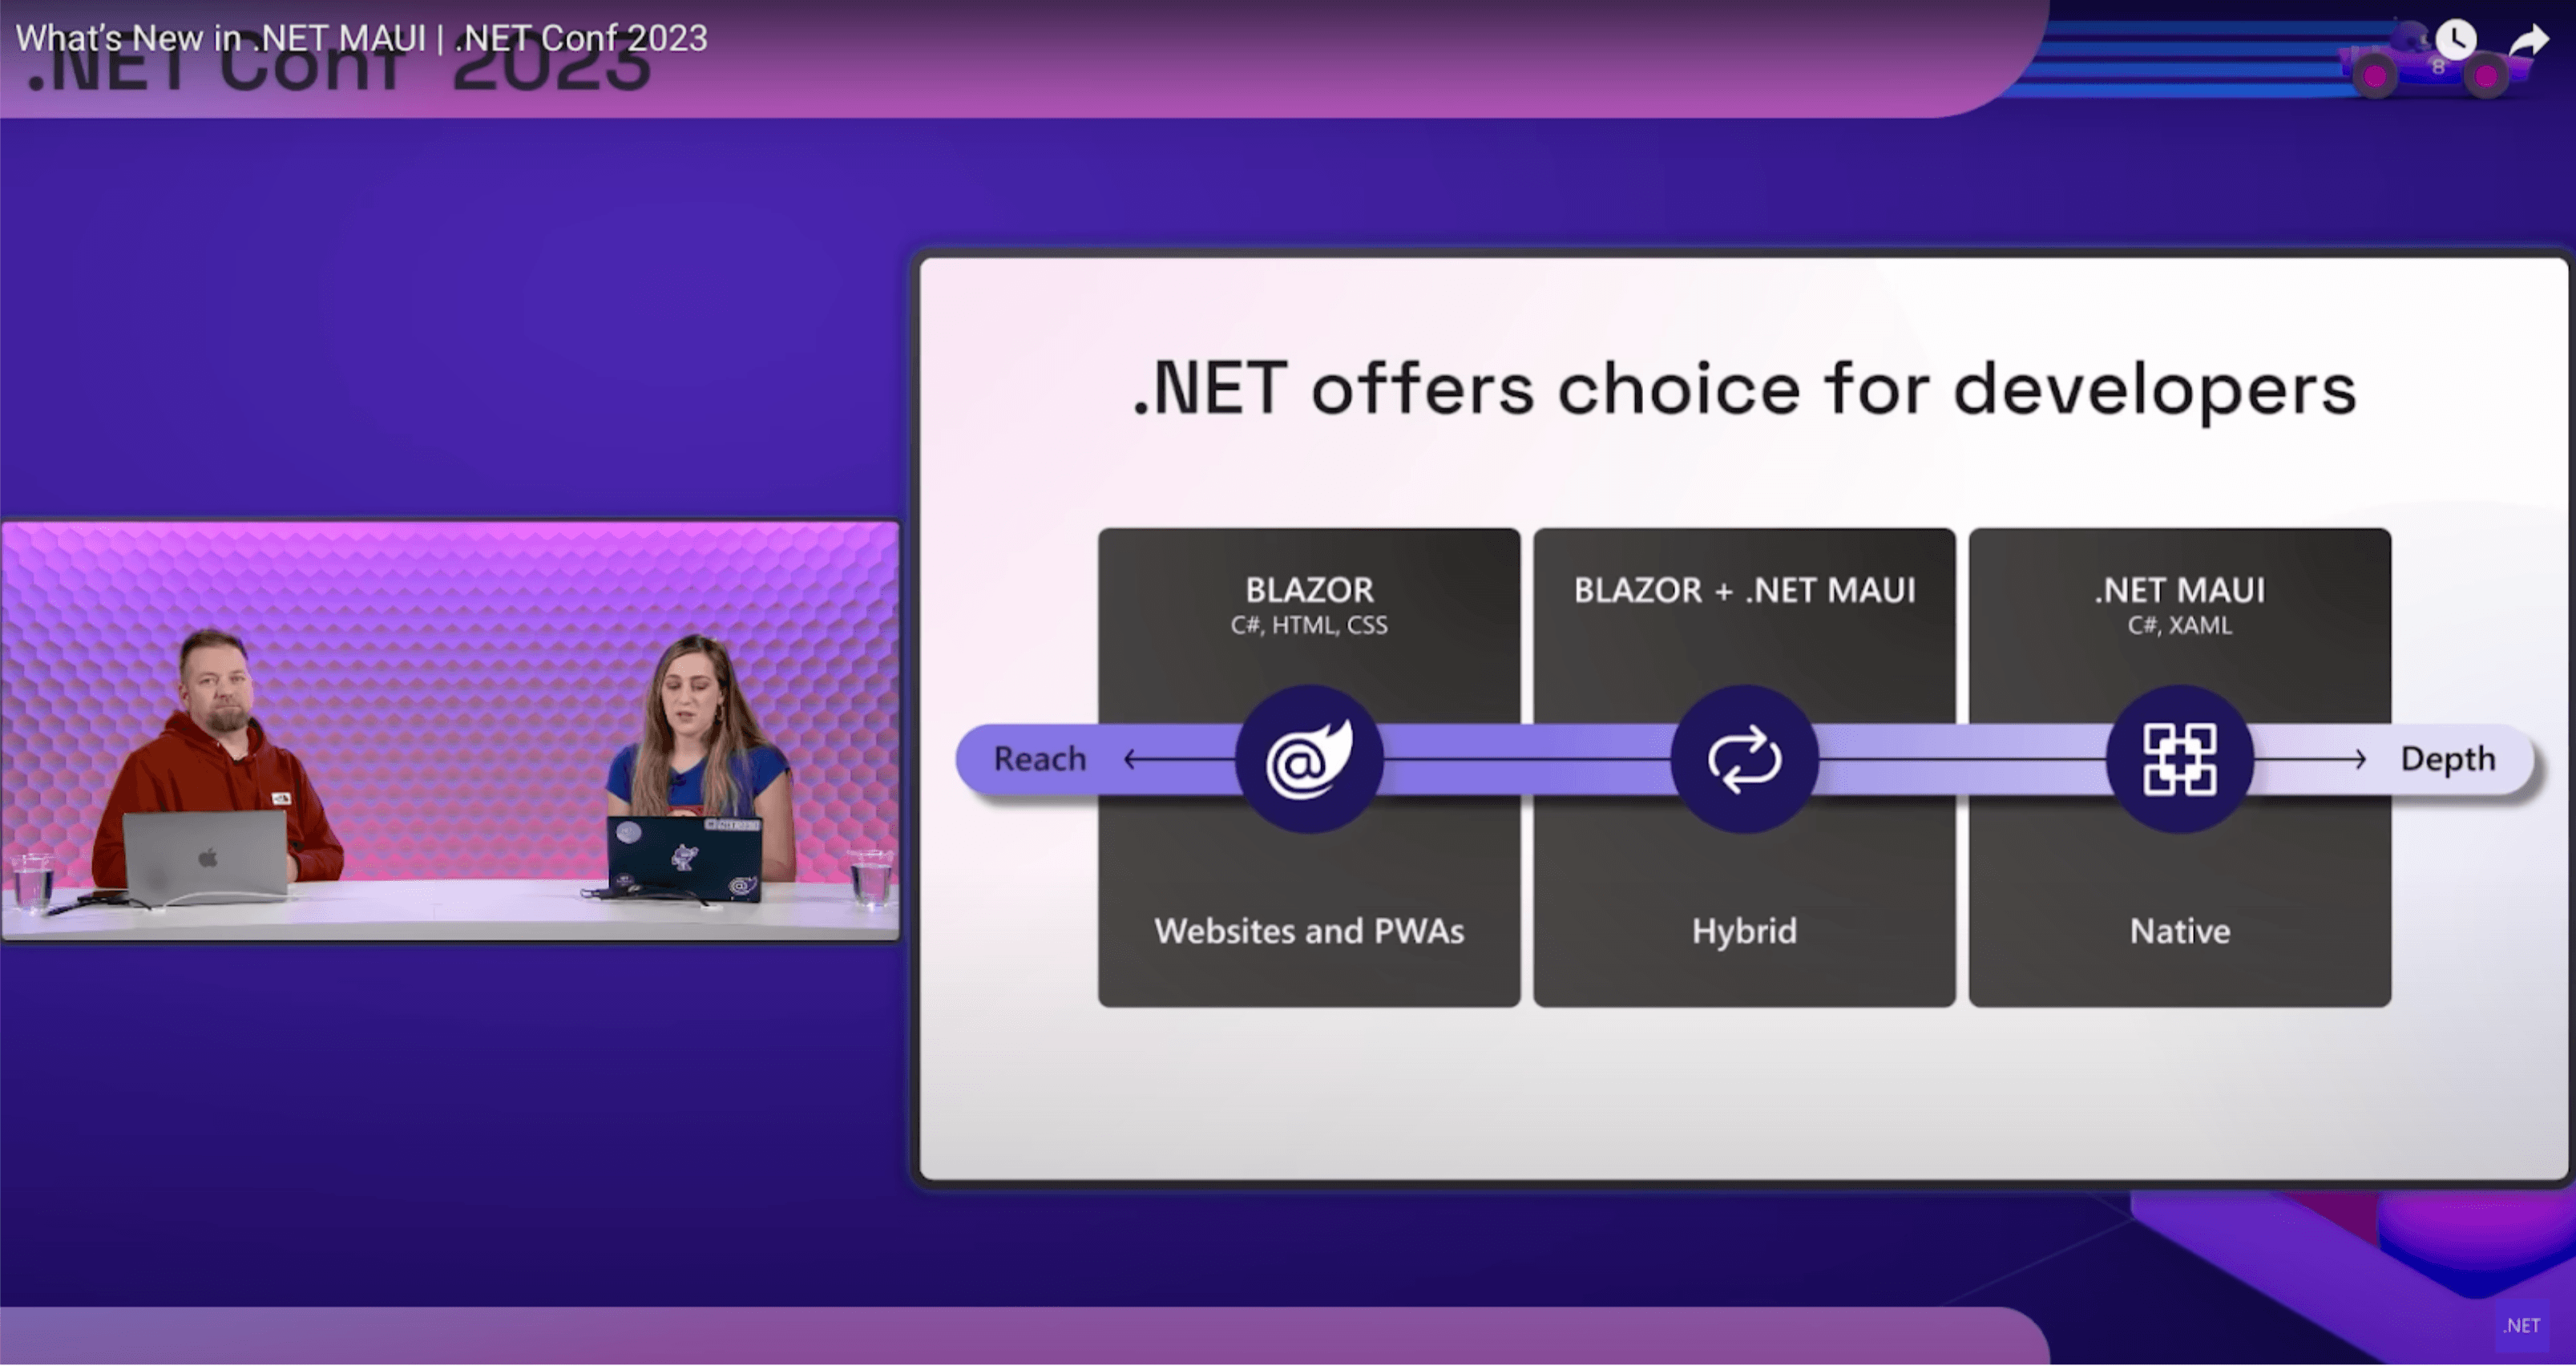 .NET offers choice for developers - on the reach end of the spectrum: Blazor for Websites and PWAs; Blazor + .NET MAUI for Hybrid; .NET MAUI for Native on the depth end of the spectrum